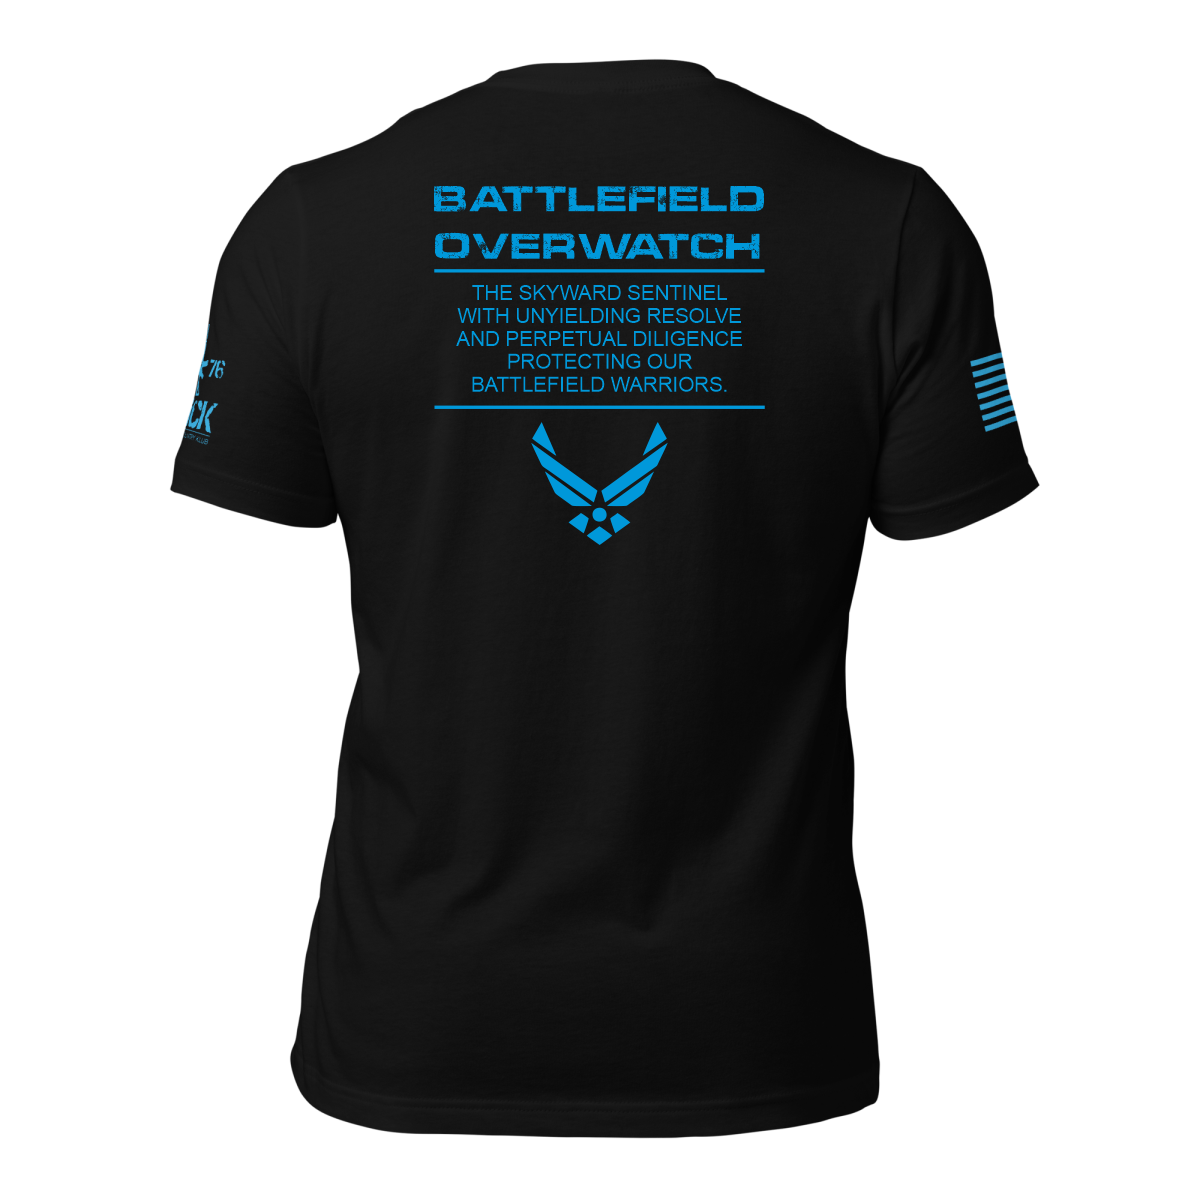 OVERWATCH AIR FORCE